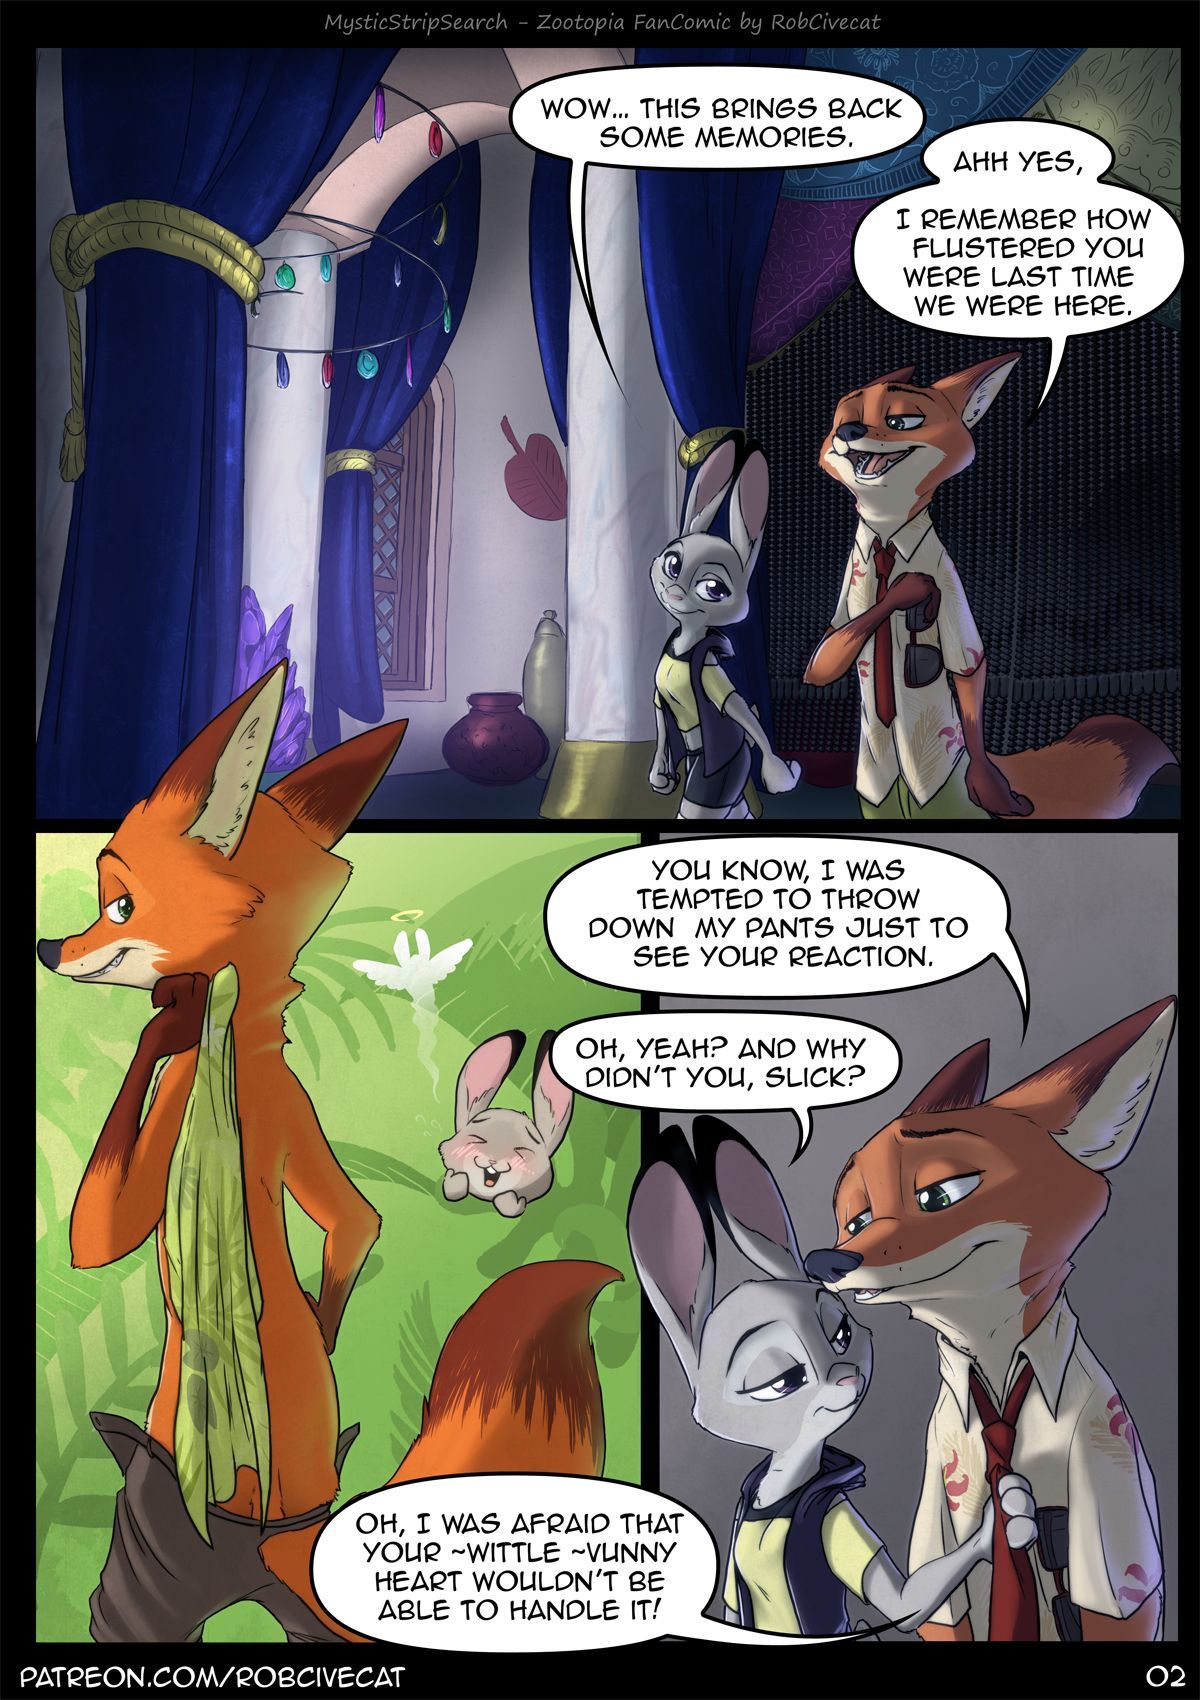 [RobCivecat] Mystic Strip Search (Zootopia) [Ongoing] 3